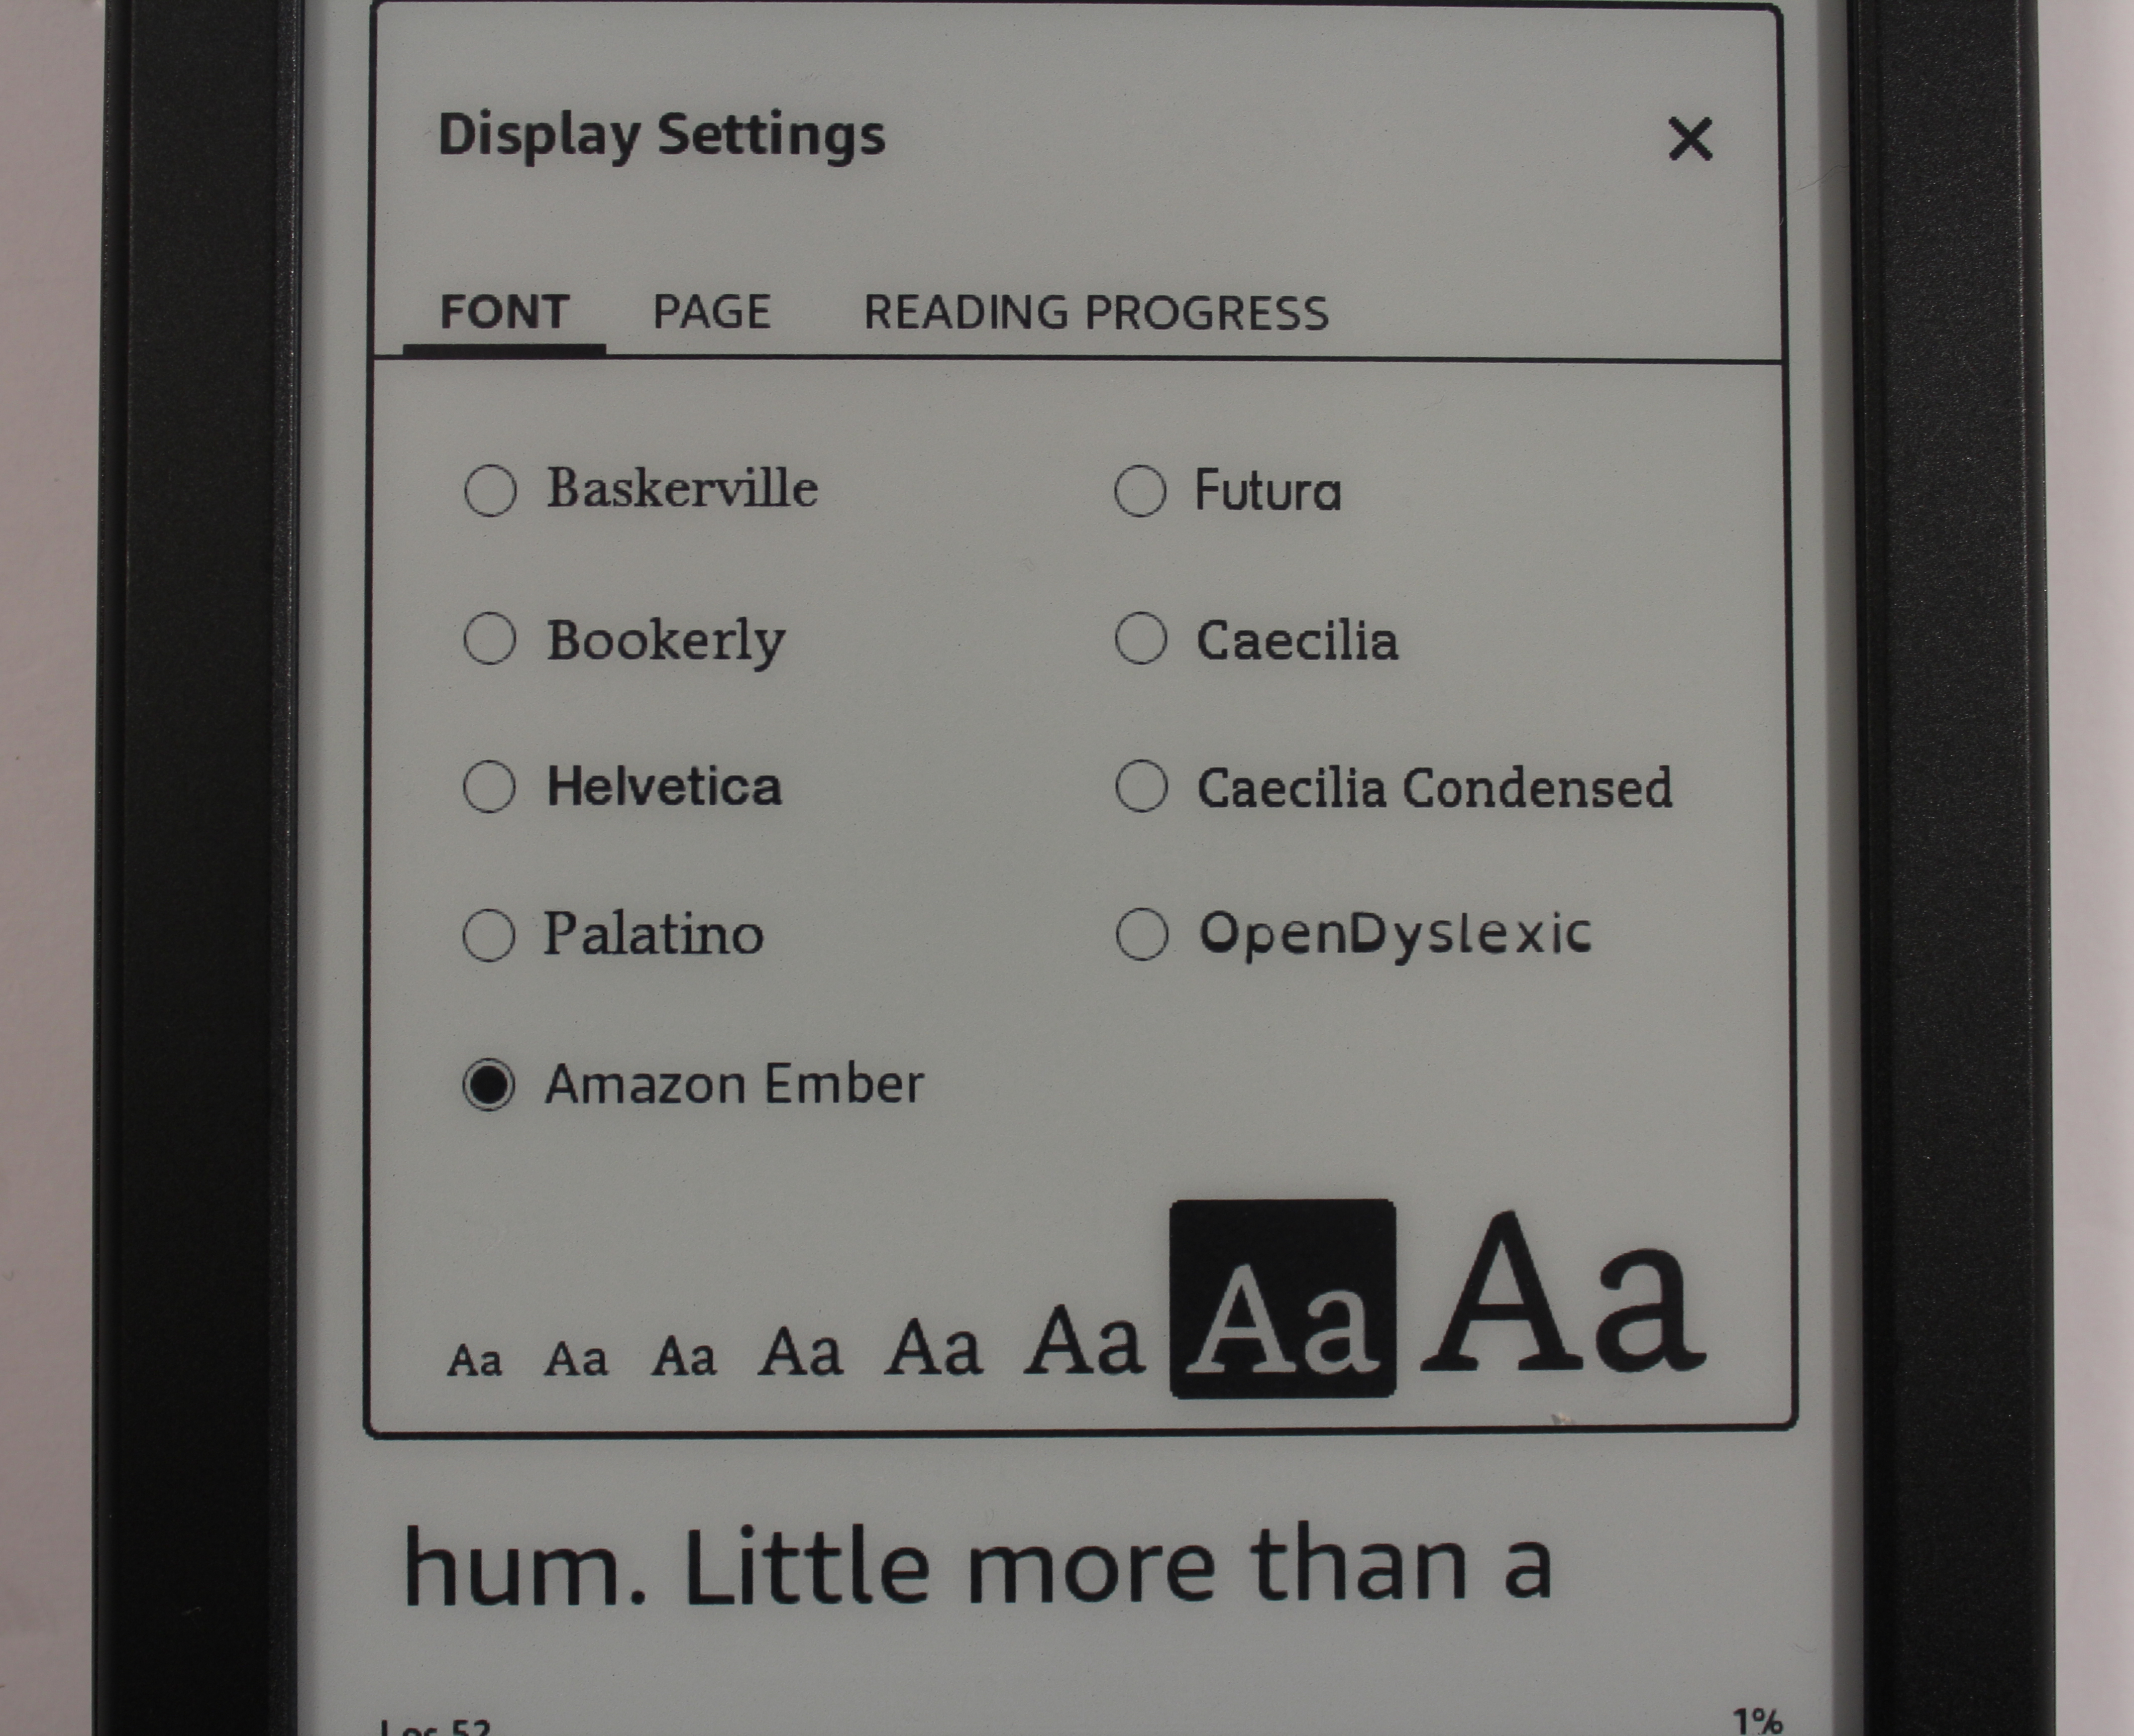 All-New Kindle E-Reader Review - 8th Generation - 2016 Model 